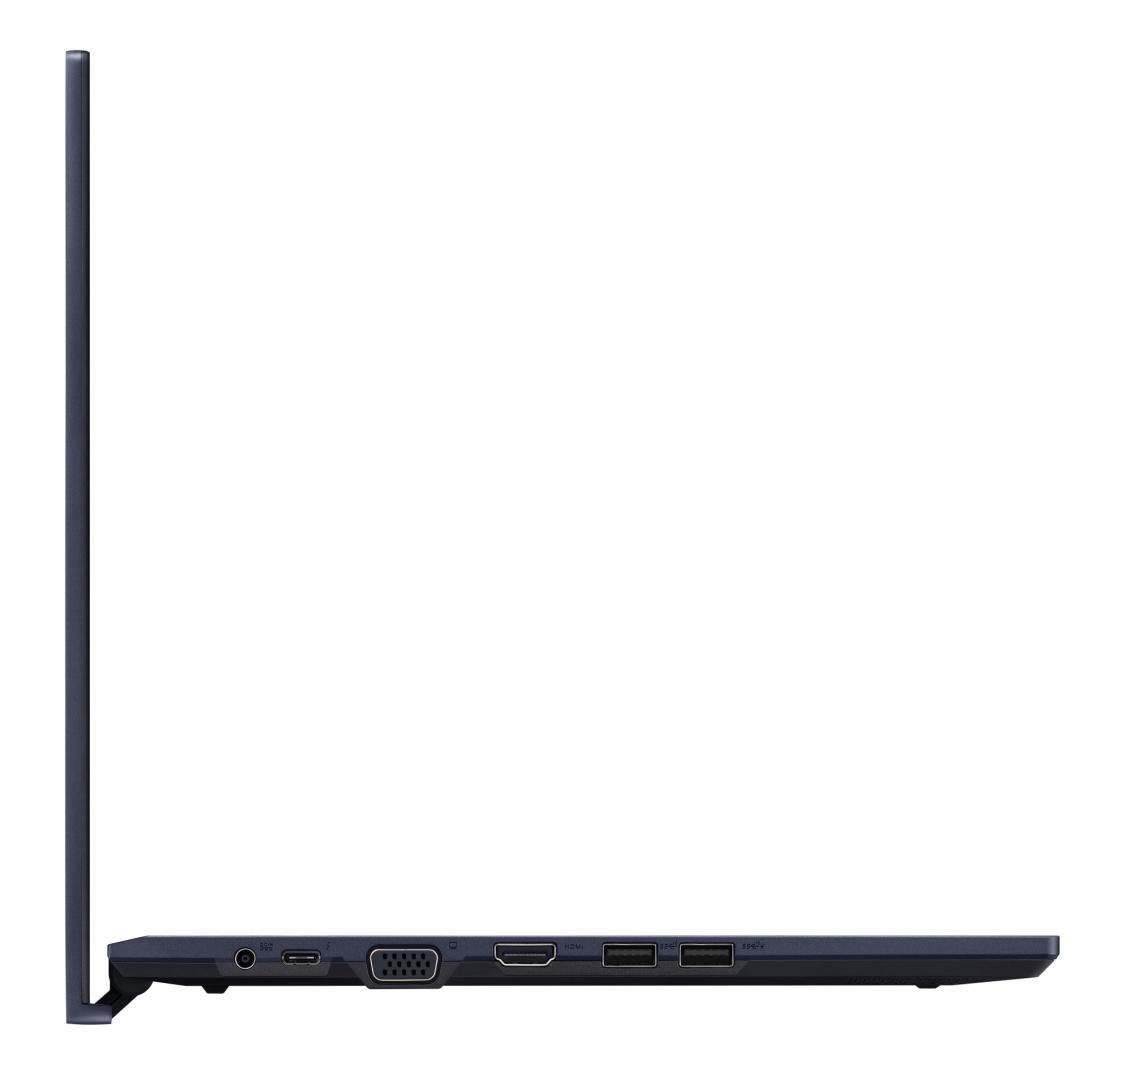 Laptop ASUS Business ExpertBook B1500CEPE-BQ0563R, 15.0-inch, FHD (1920 x 1080) 16:9, Procesor Intel® Core™ i5-1135G7 Processor 2.4 GHz (8M Cache, up to 4.2 GHz, 4 cores), 8GB DDR4, 512GB SSD, NVIDIA® GeForce® MX330, Windows 10 Pro, Star Black_4